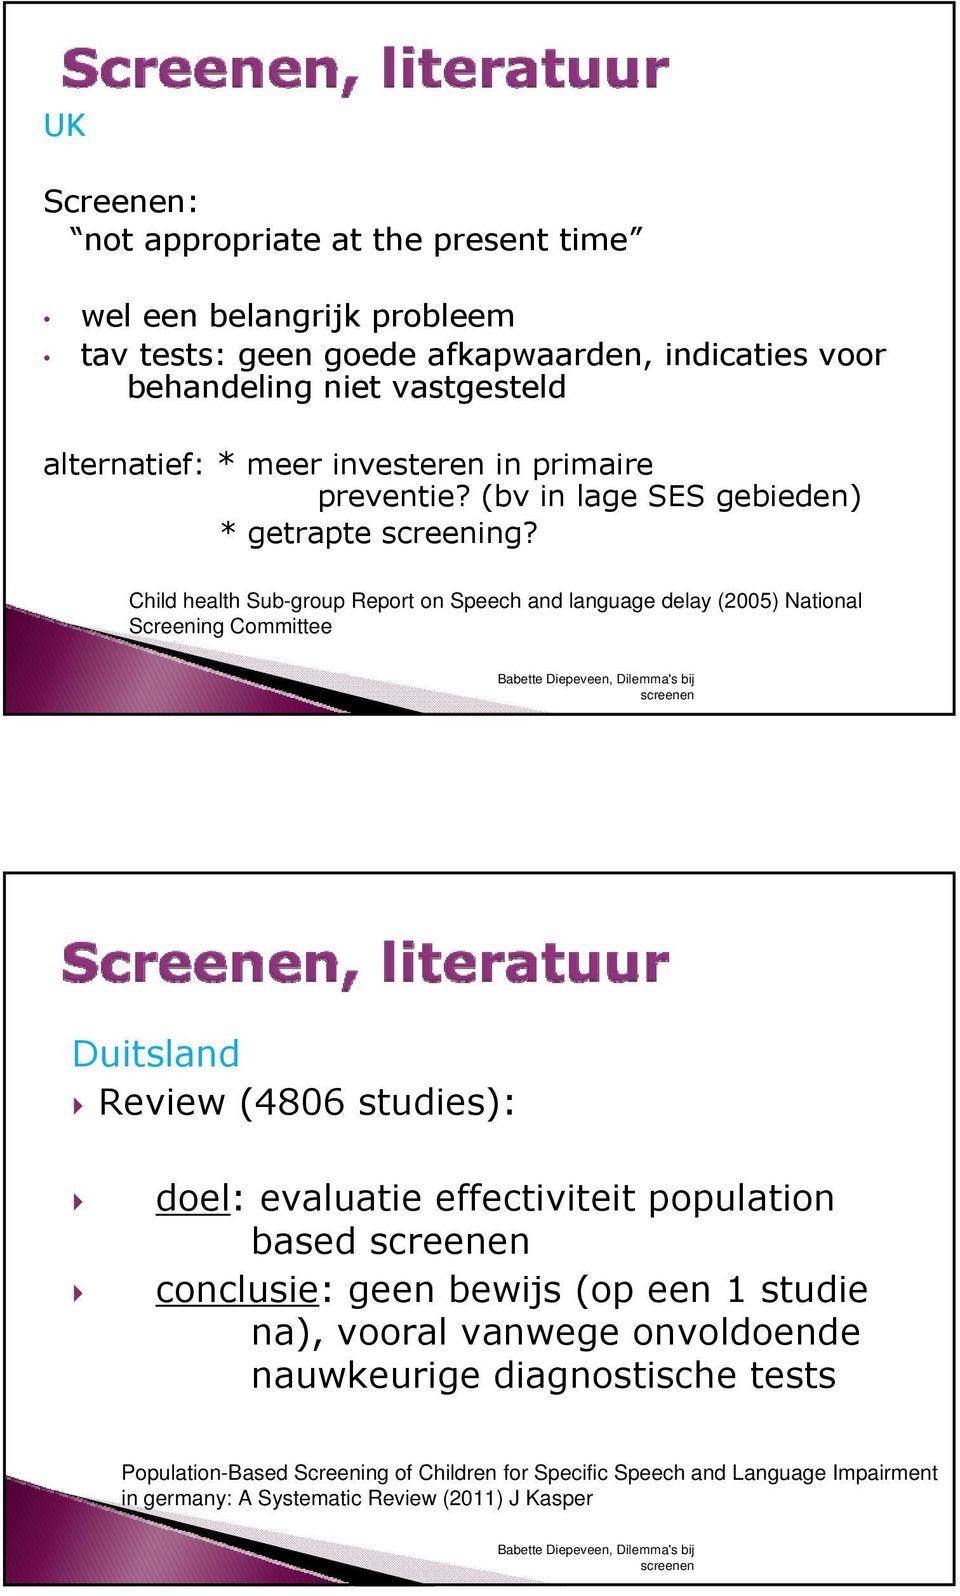 Child health Sub-group Report on Speech and language delay (2005) National Screening Committee Duitsland Review (4806 studies): doel: evaluatie effectiviteit